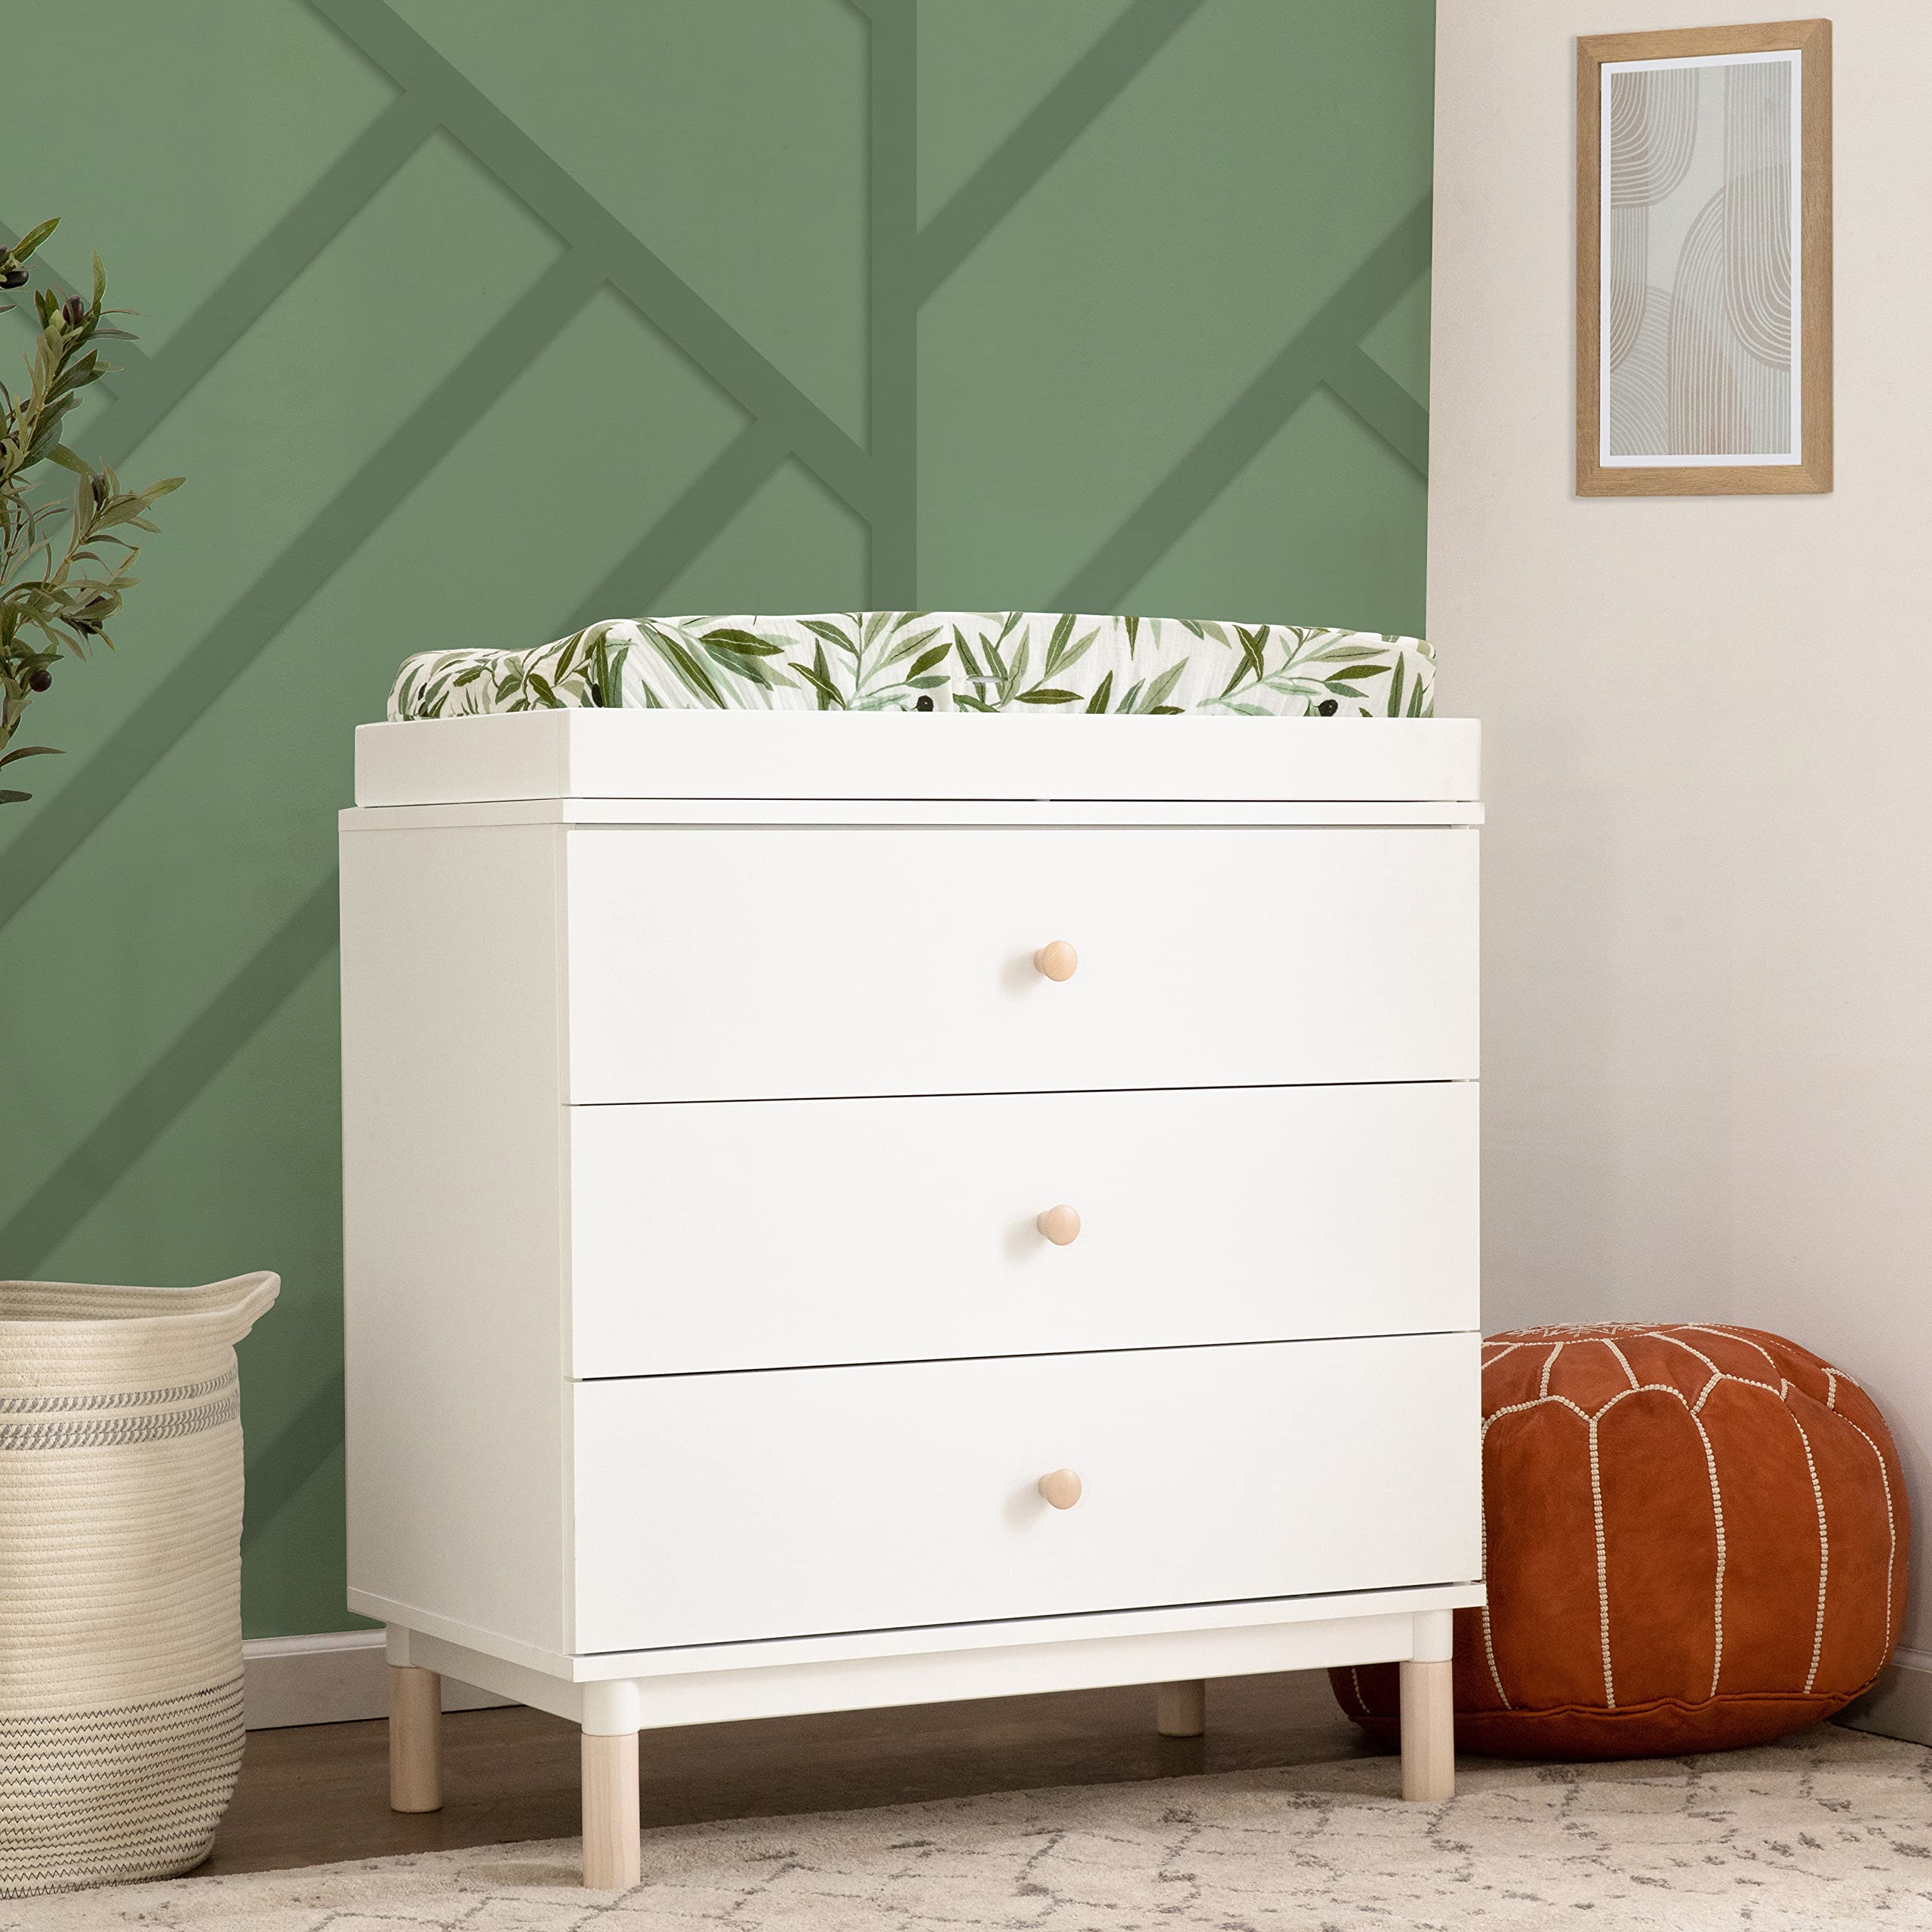 Babyletto Gelato 3-Drawer Changer Dresser with Removable Changing Tray in White and Washed Natural, Greenguard Gold Certified